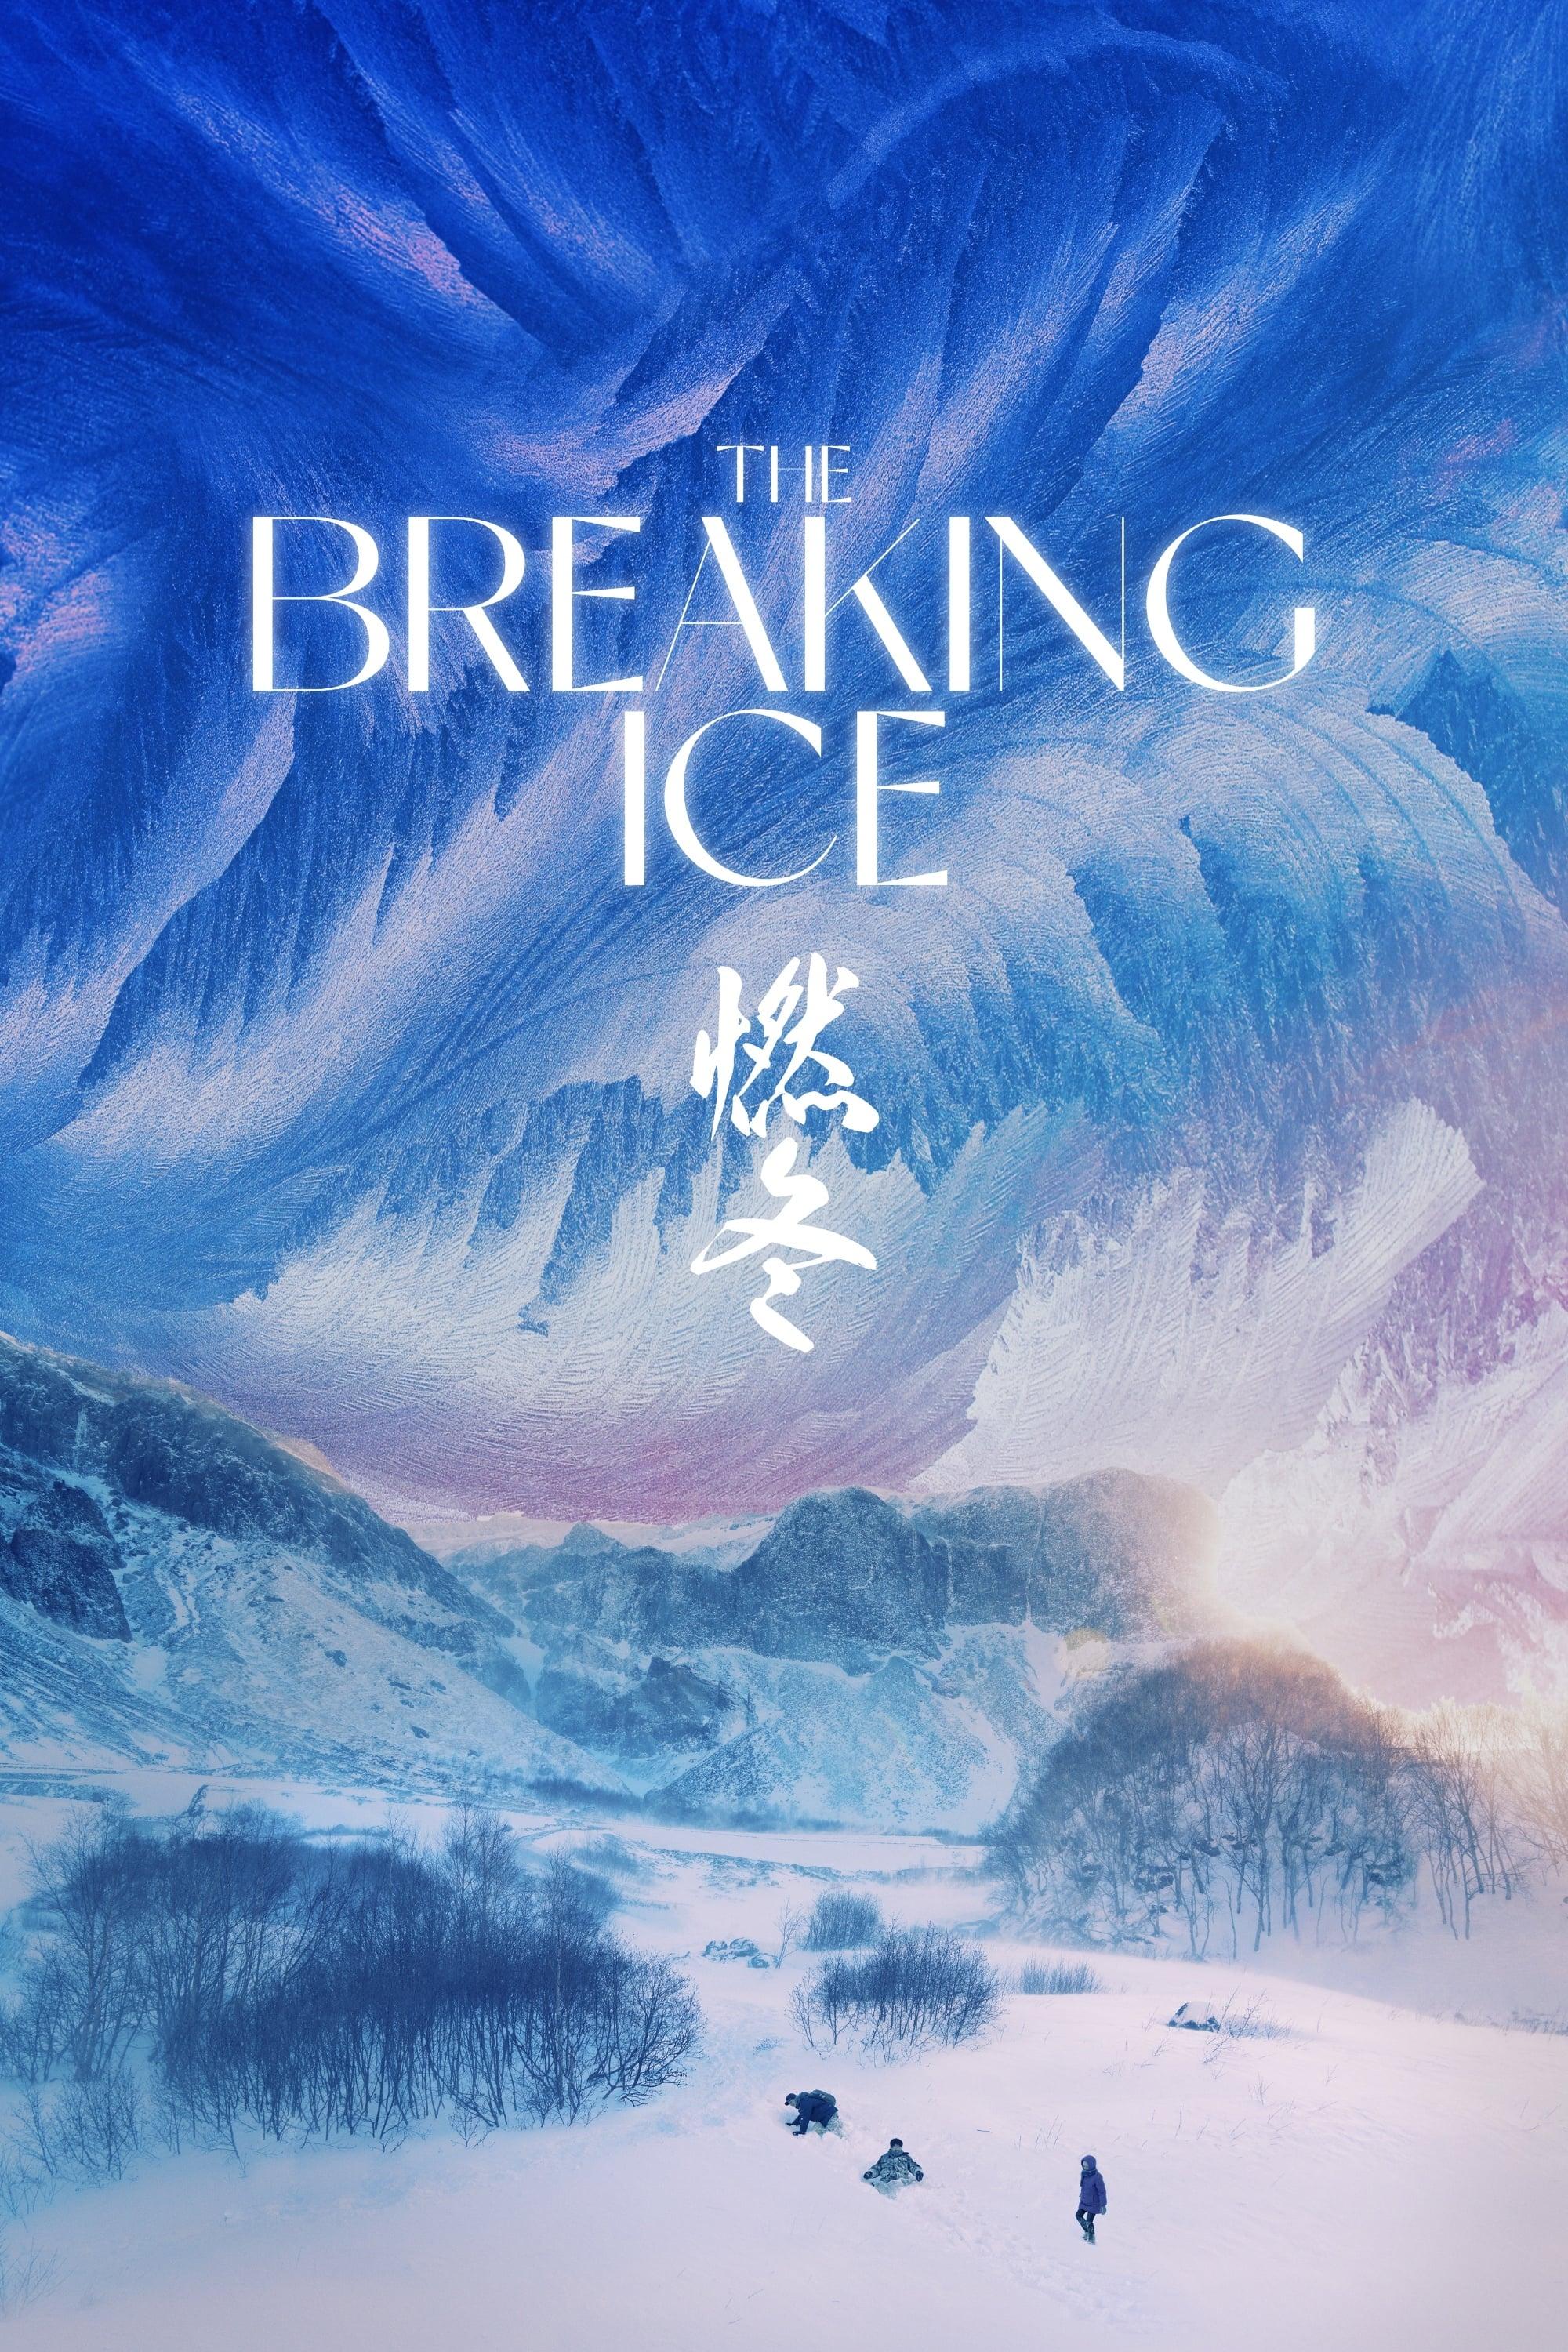 The Breaking Ice poster